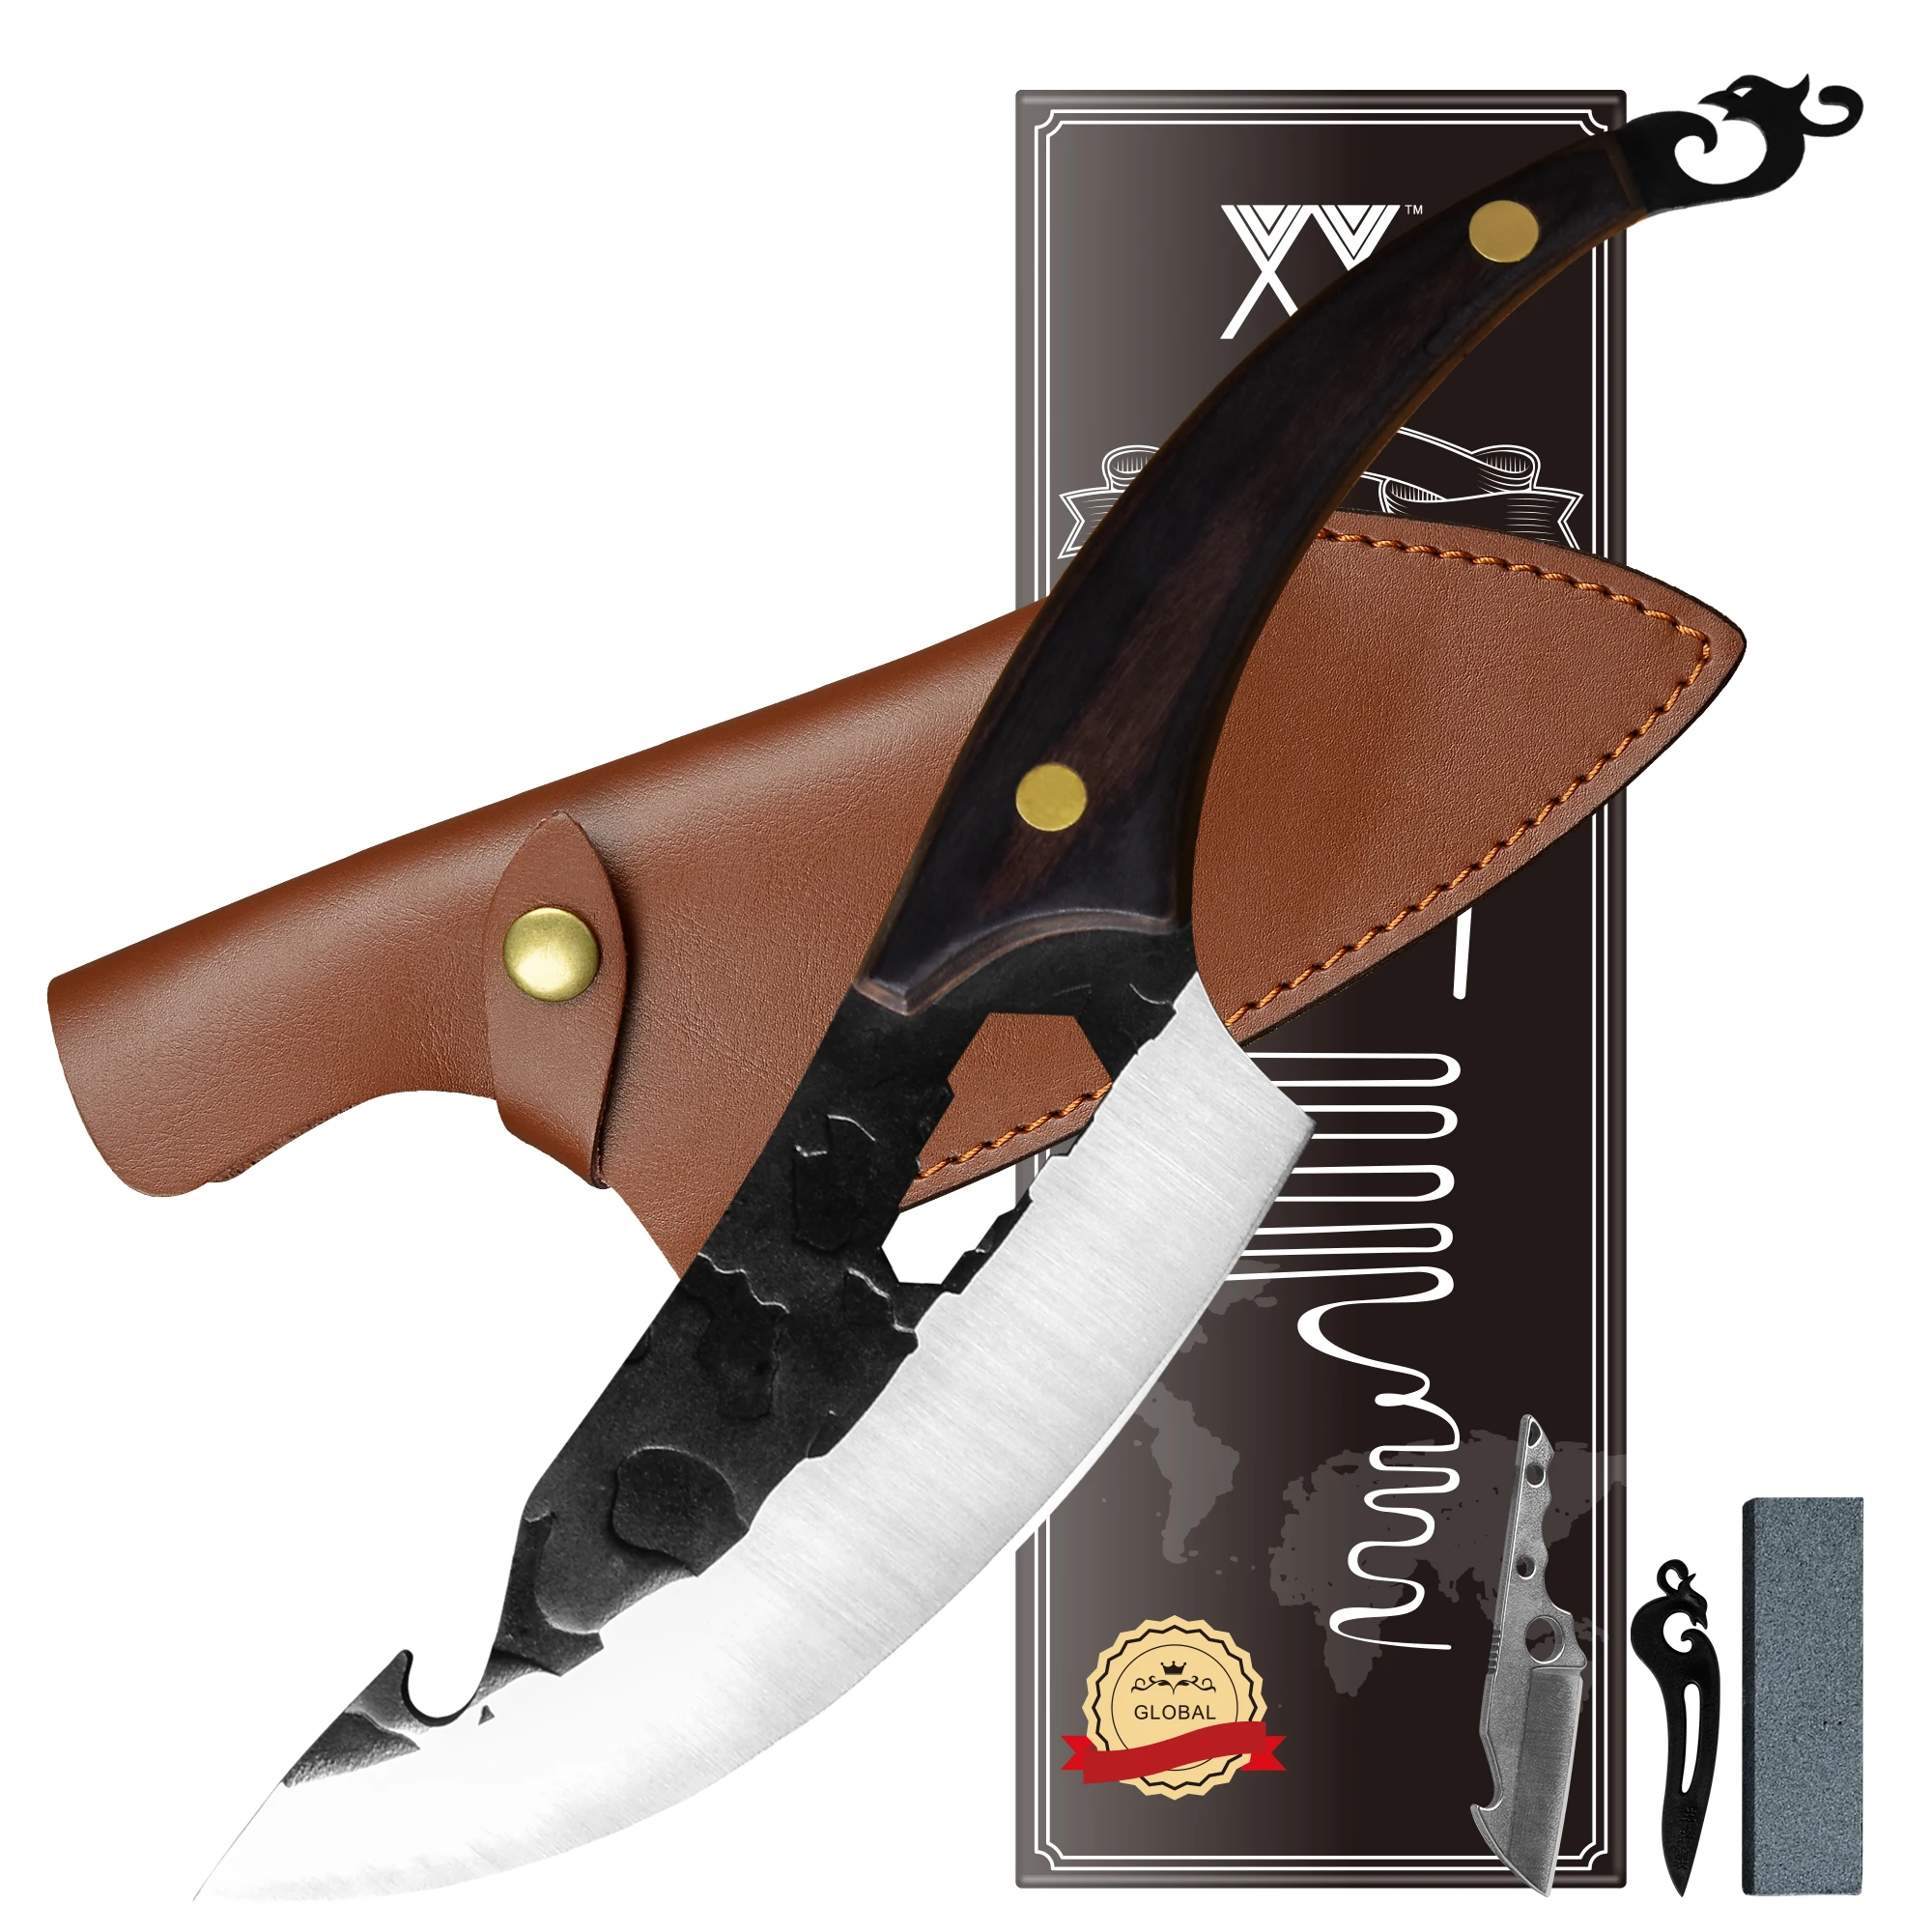 

XYj Outdoor Knife With Sheath 6 Inch Stainless Steel Cutting Knives Boning Slicing Filleting Fish Knife Meat Cleaver Wood Handle